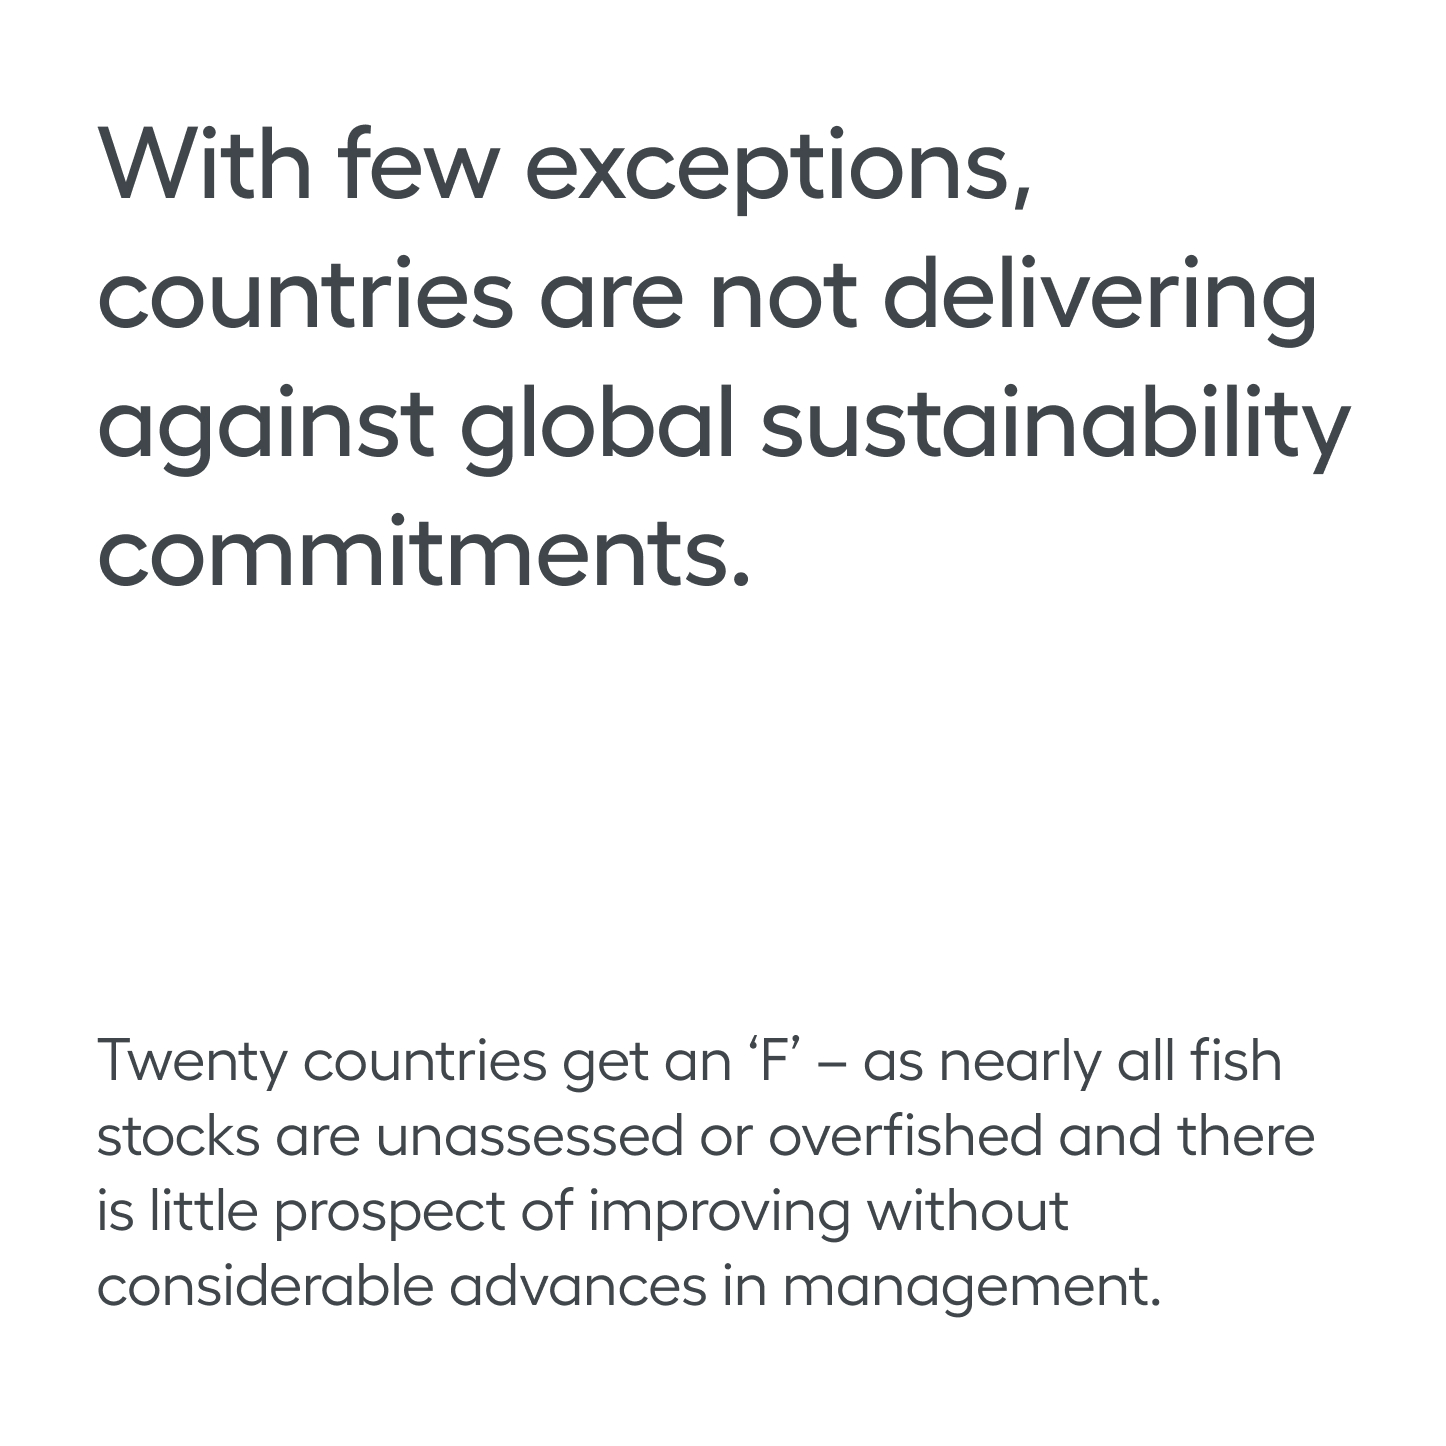 White background with copy that raises awareness about how the majority of countries fail to meet global sustainability commitments.